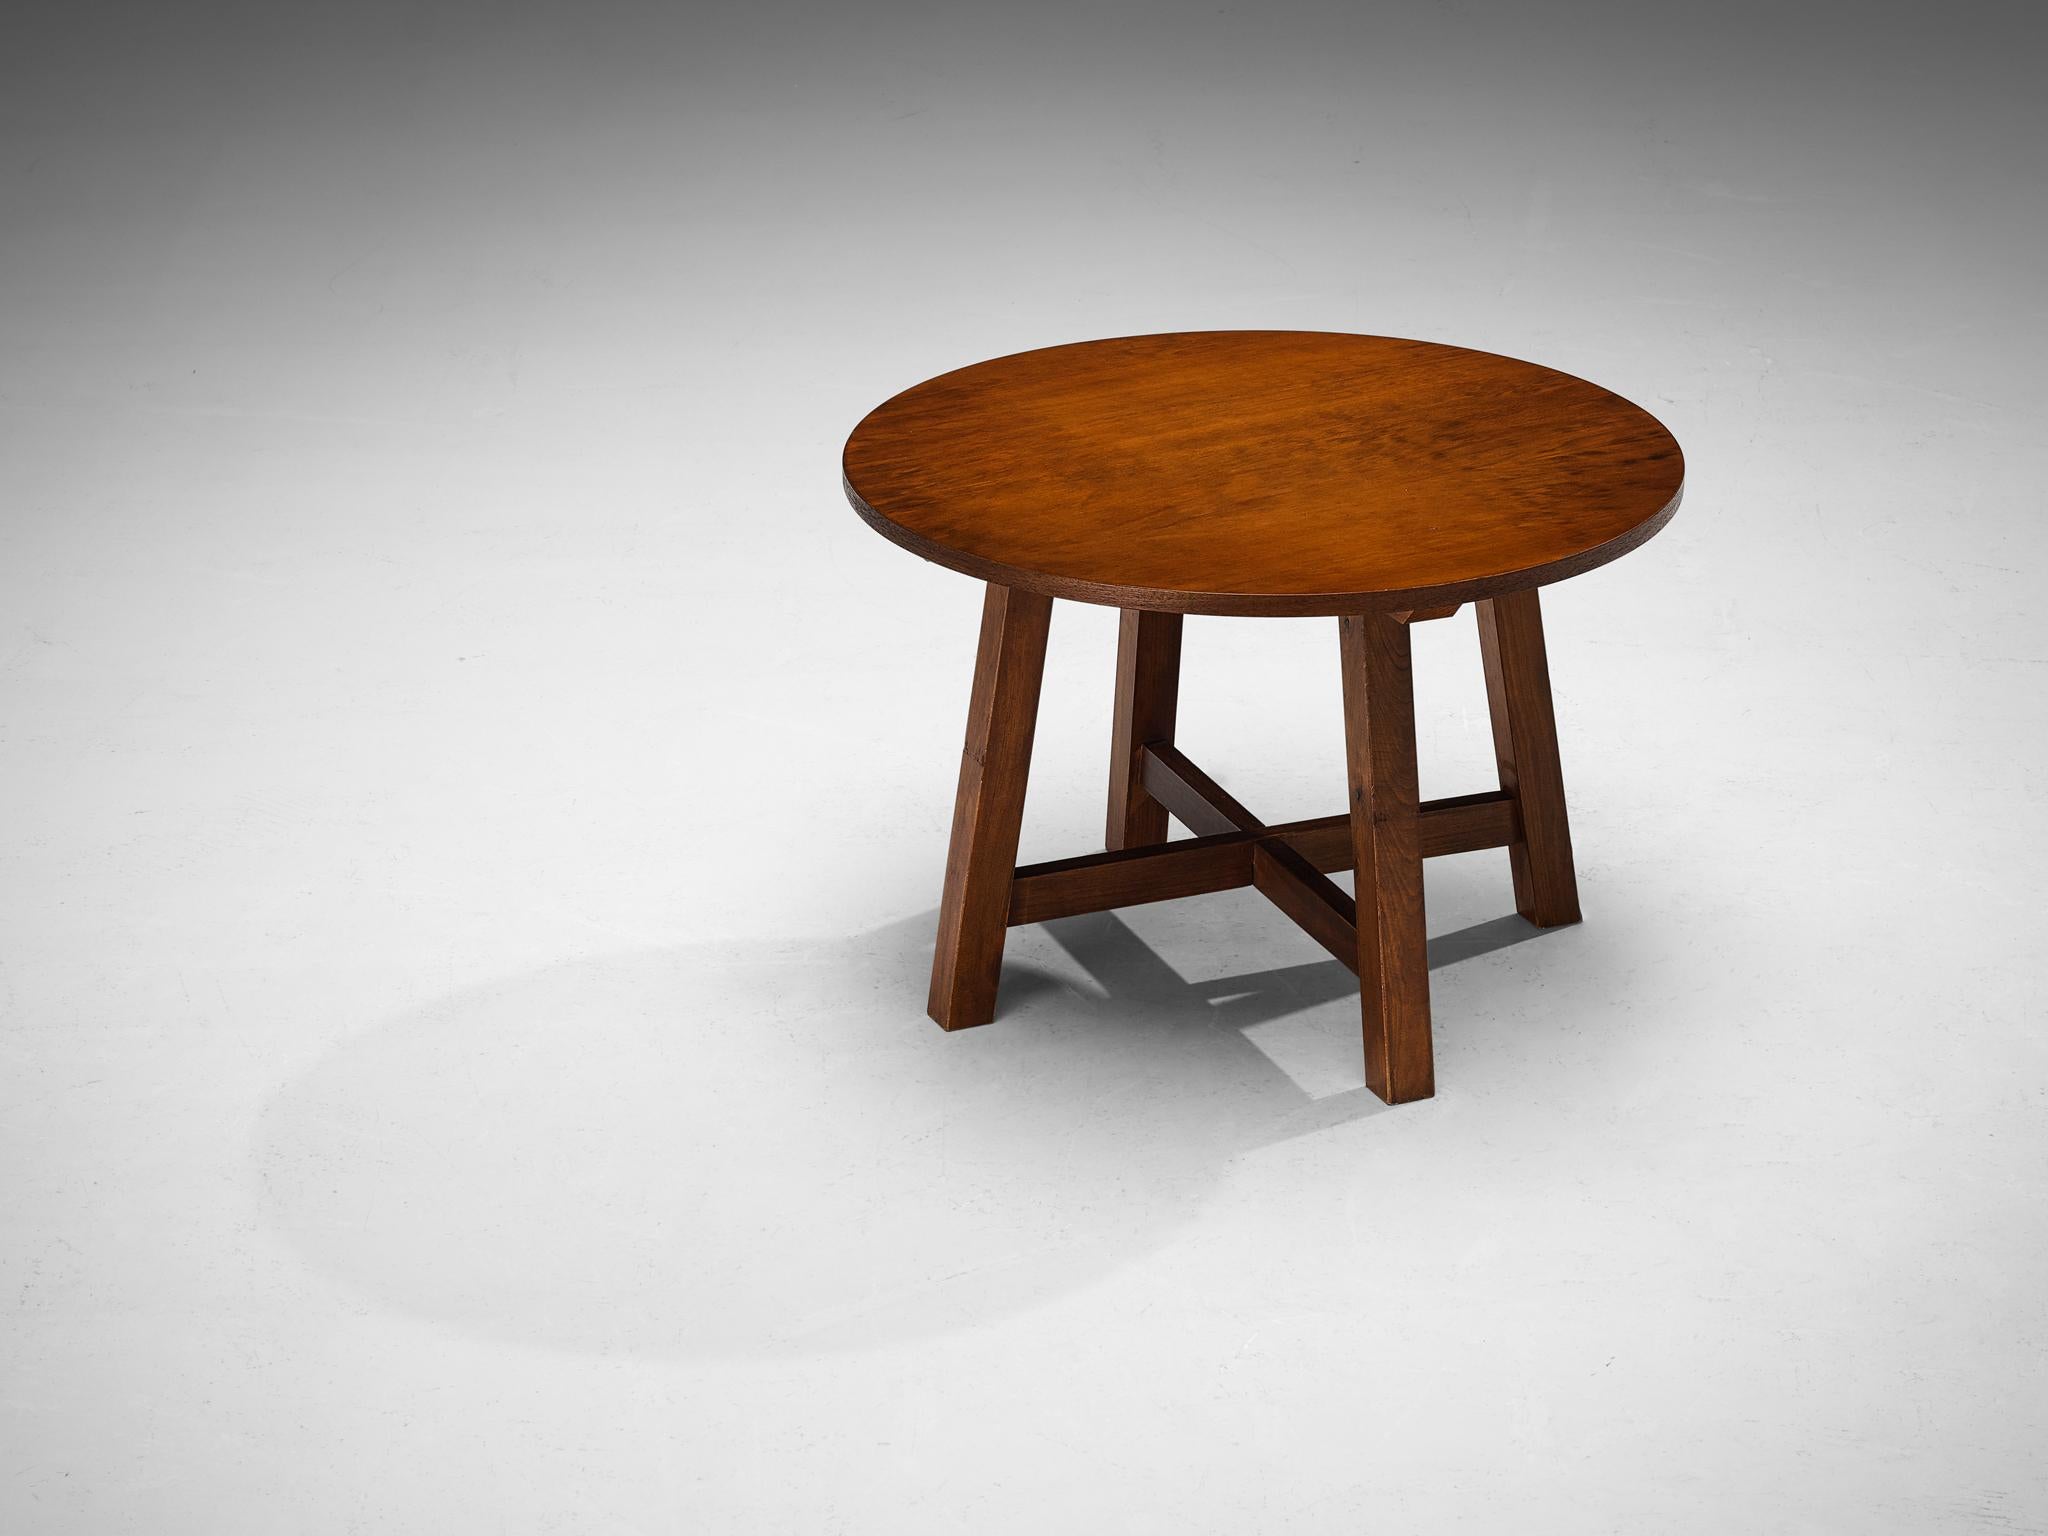 Side table, walnut, pine, Spain, 1960s

Made in Spain, the table's simple and naturalistic look allows for a seamlessly blend with one's interior. The round tabletop is executed in walnut and extends beyond the base. Characterized by an open